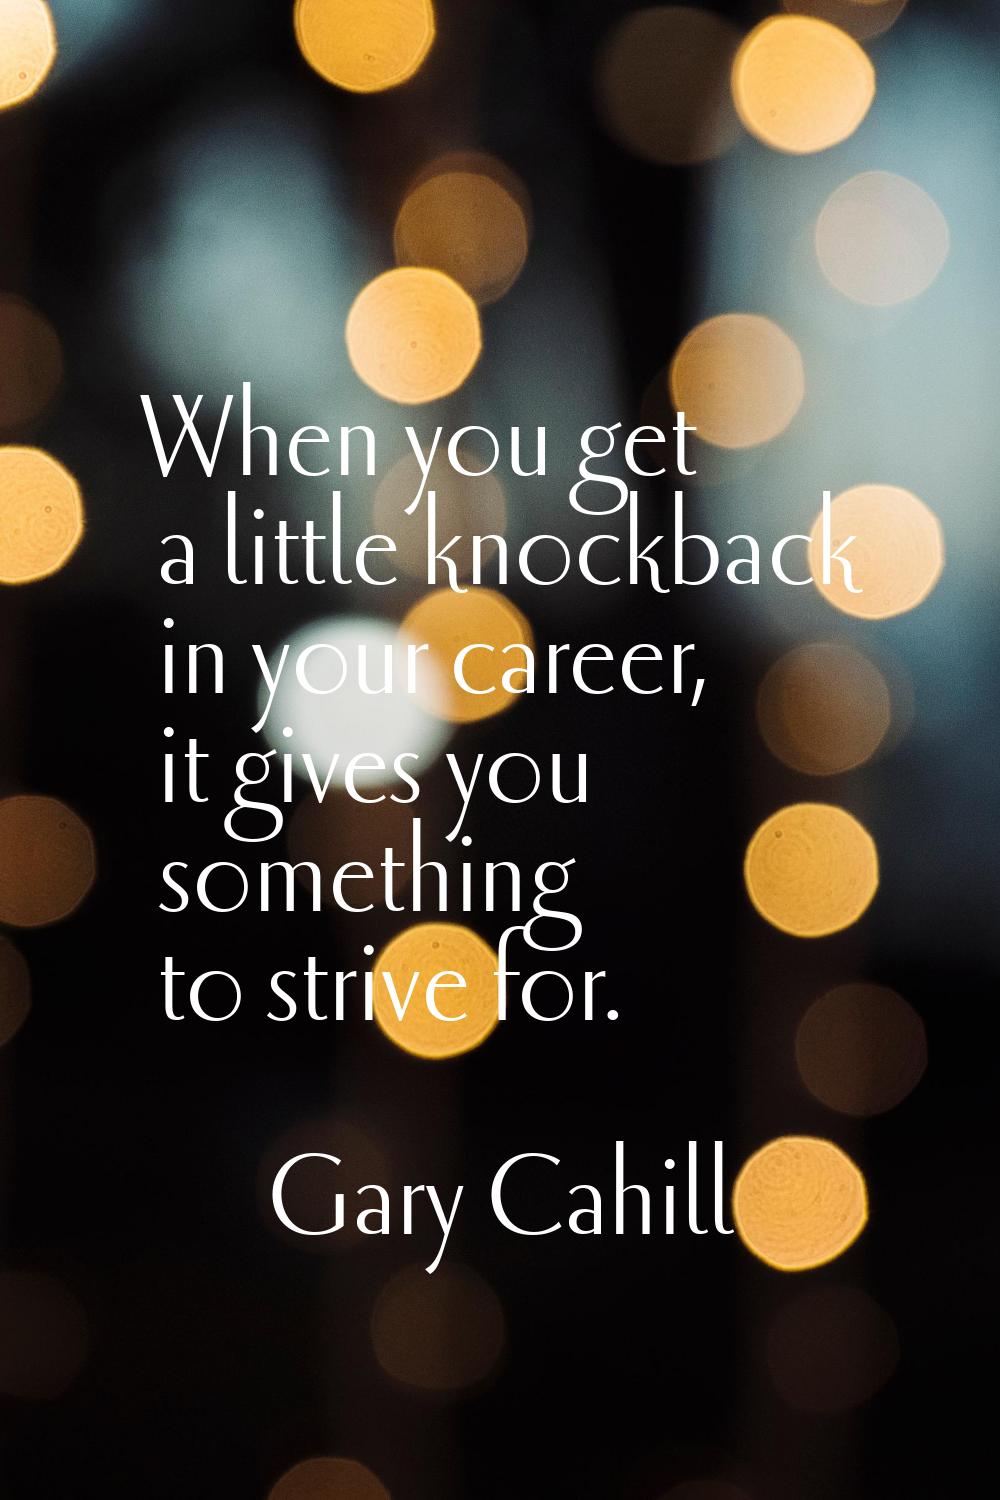 When you get a little knockback in your career, it gives you something to strive for.